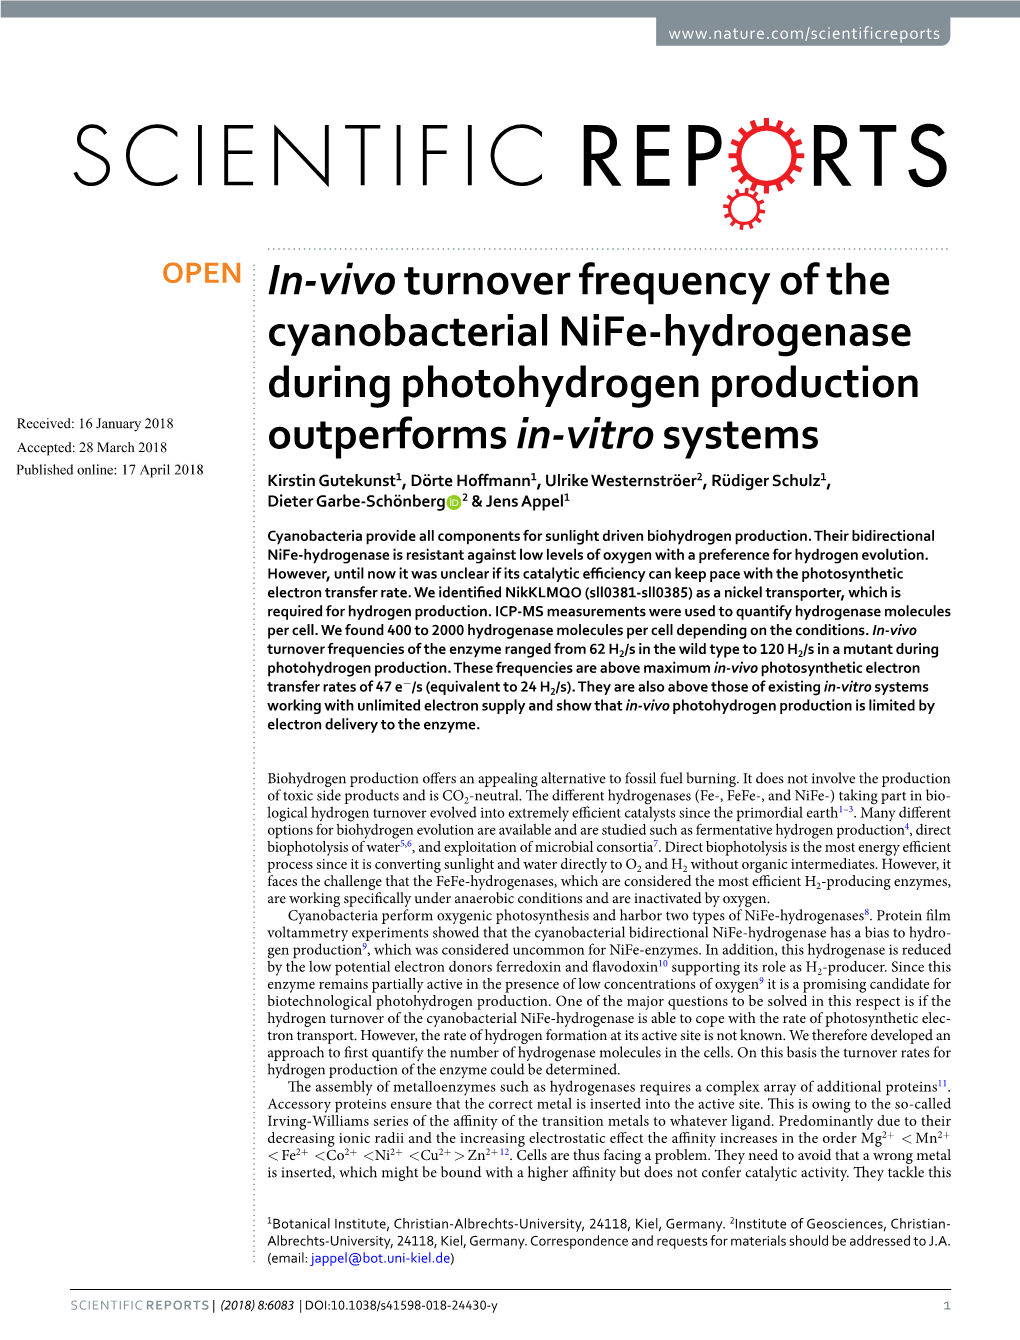 In-Vivo Turnover Frequency of the Cyanobacterial Nife-Hydrogenase